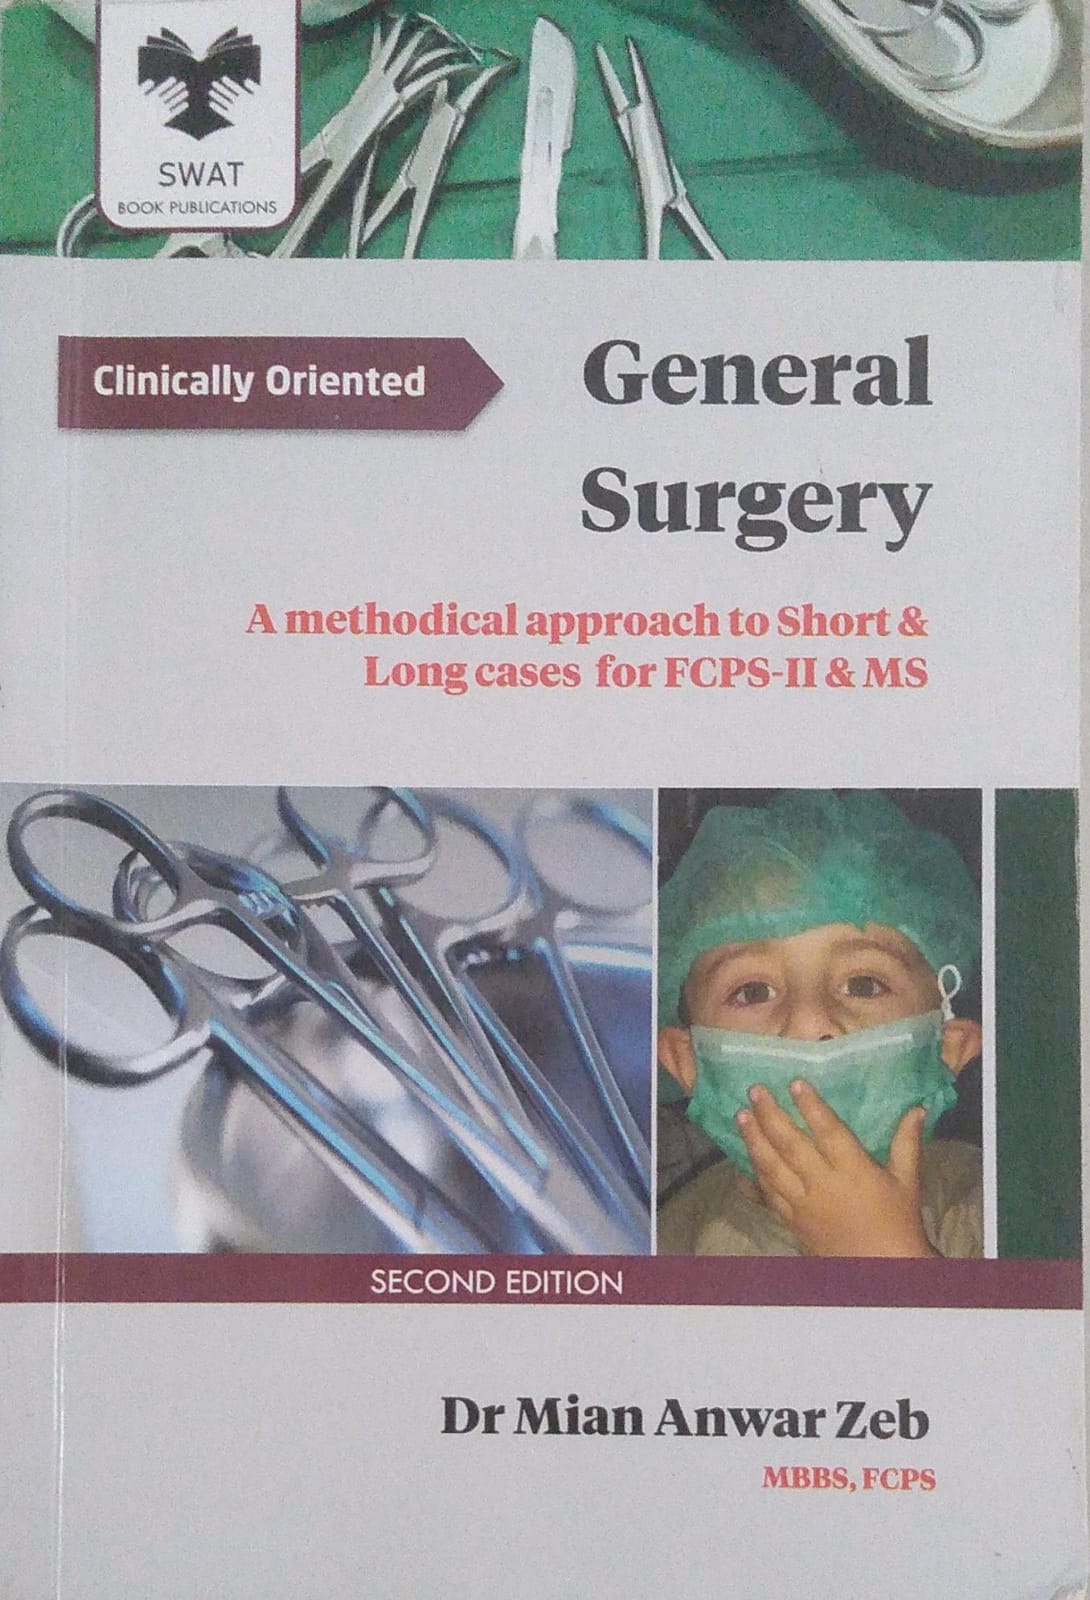 CLINICAL ORIENTED GENERAL SURGERY, 2e